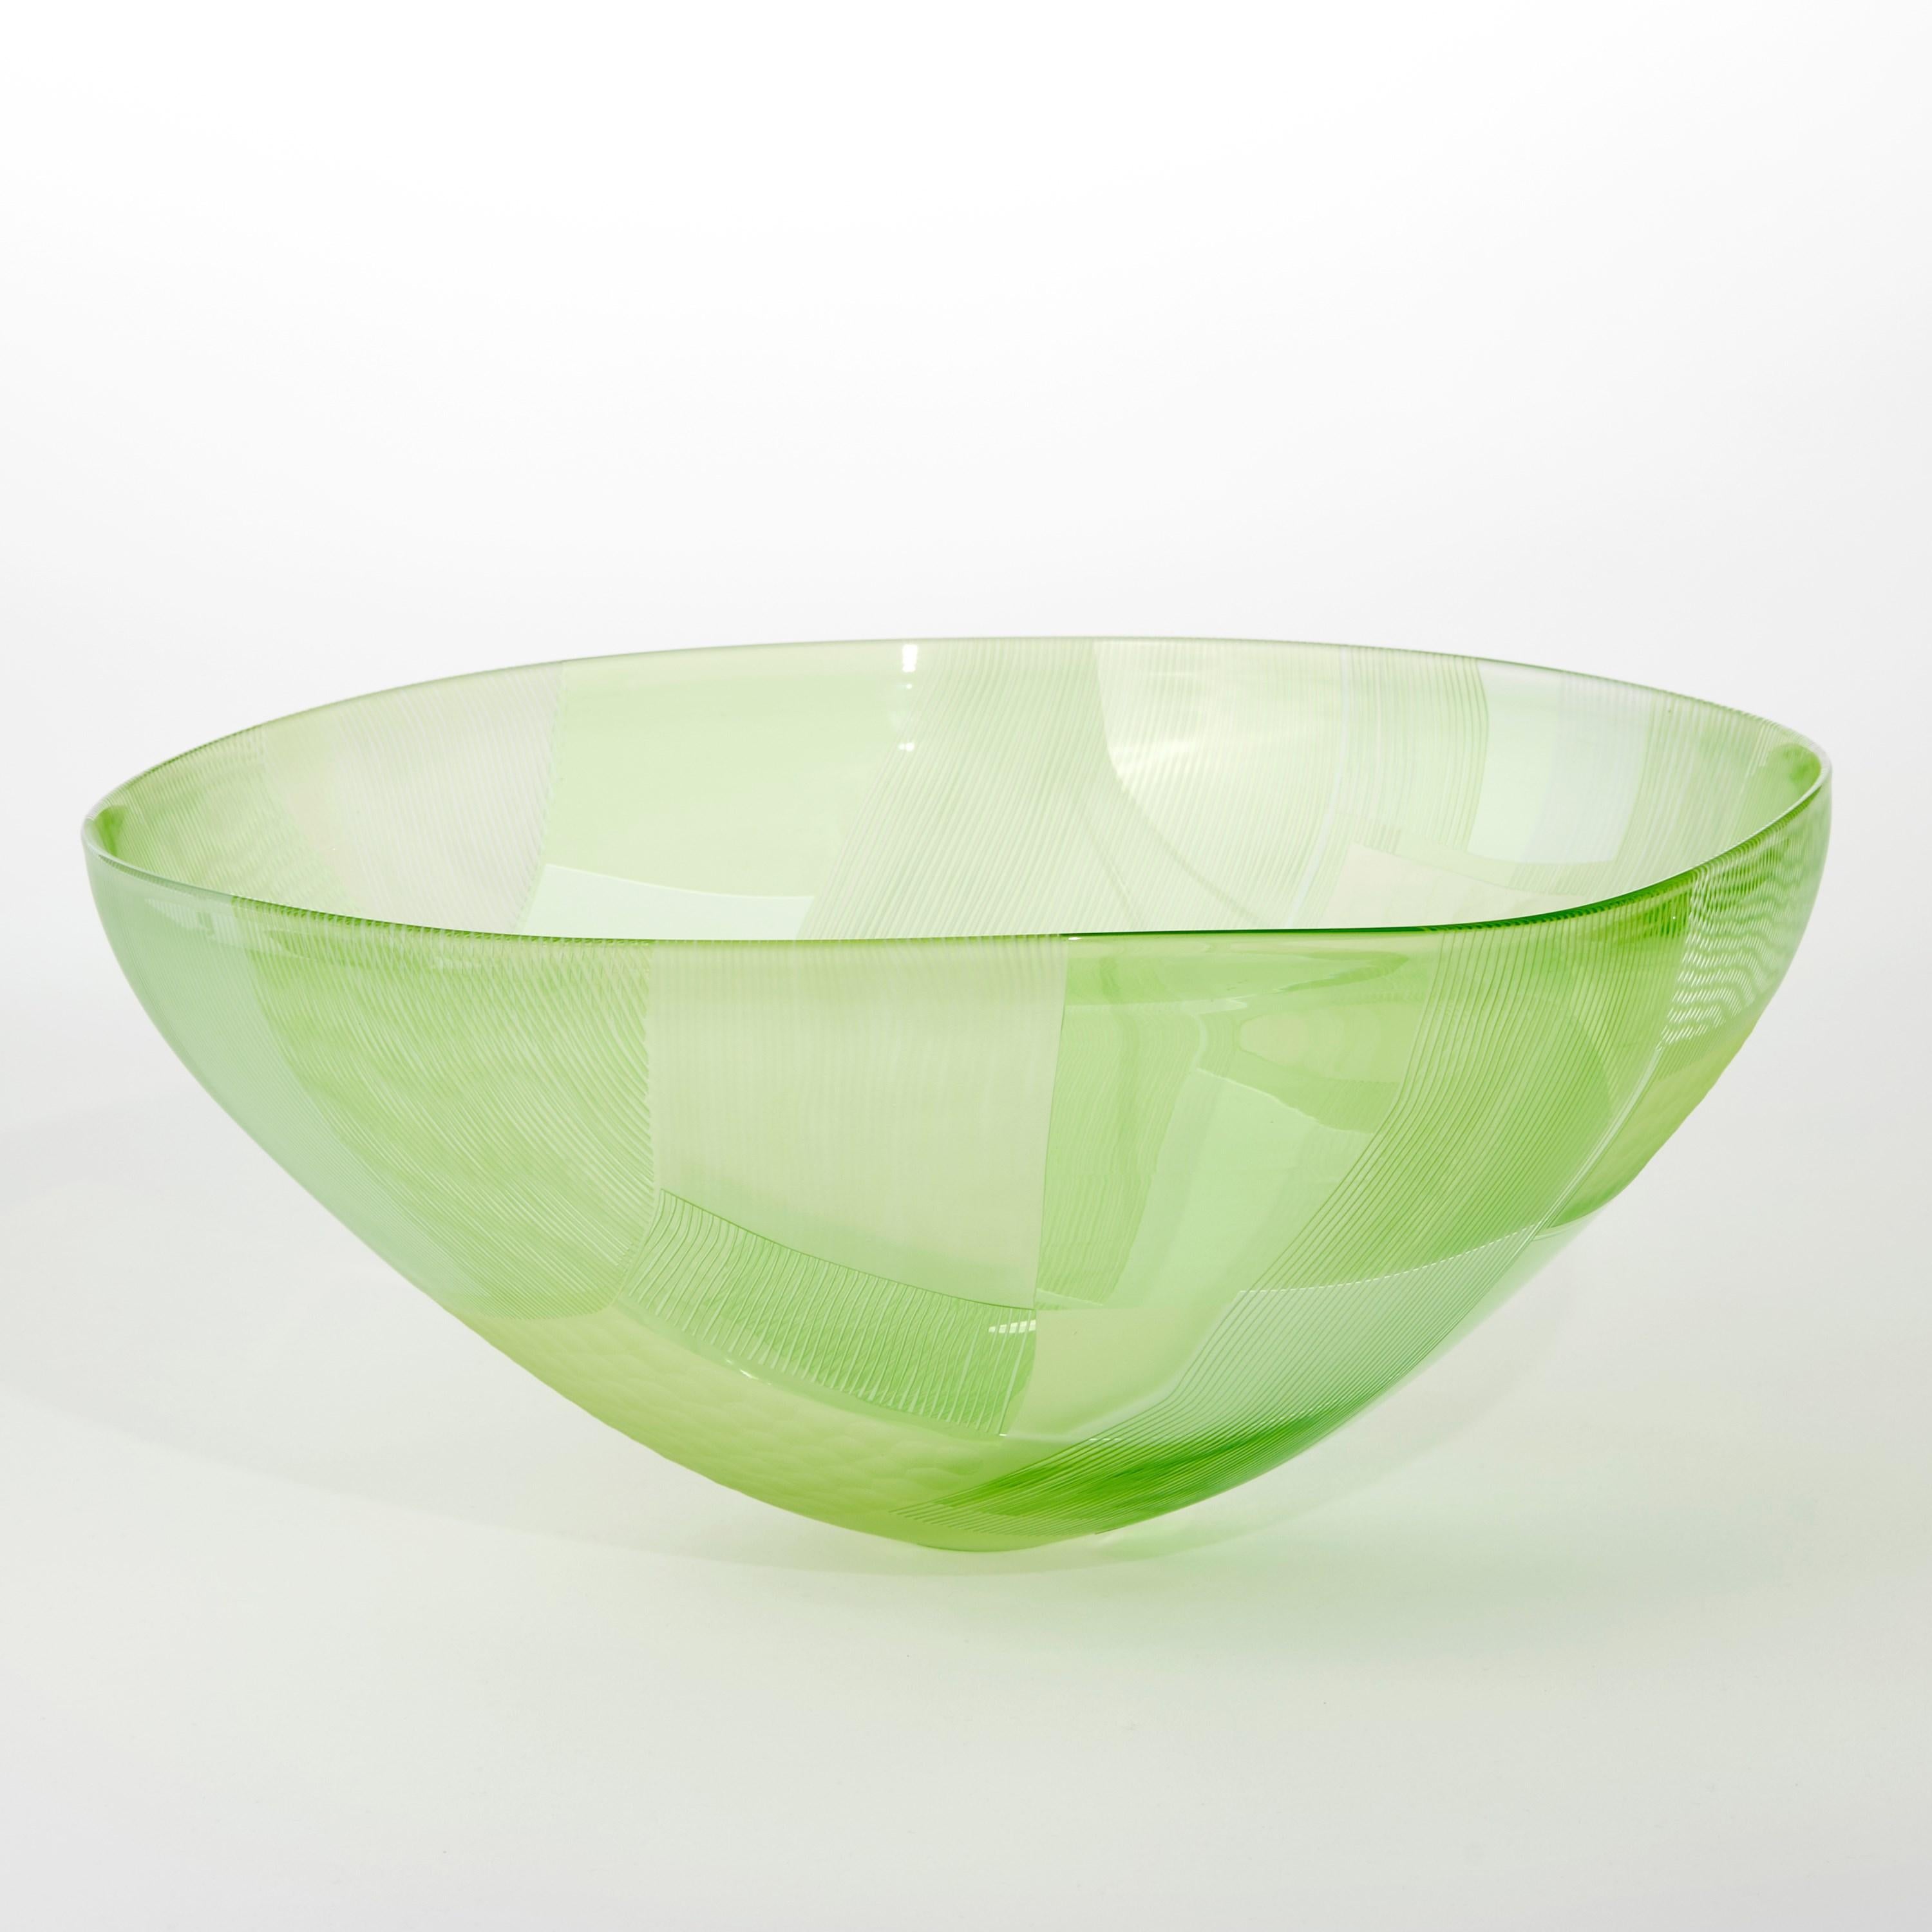 Organic Modern Abstracted Land Moss Green over Spring Green, a cut glass bowl by Kate Jones For Sale